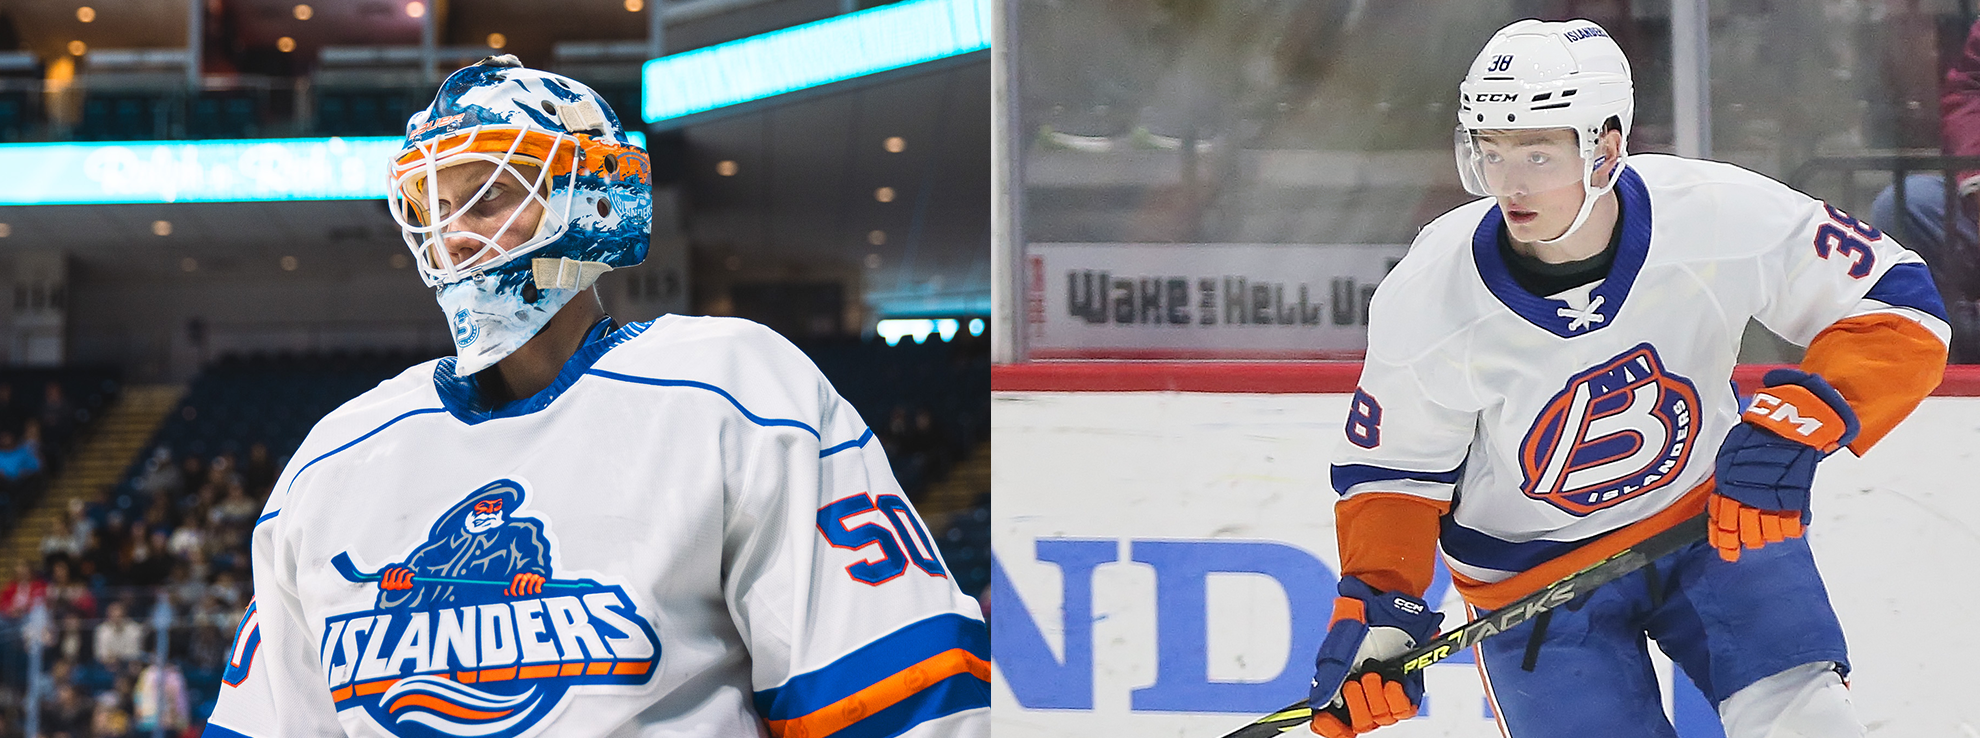 Tikkanen, Jefferies Sign Entry-Level Contracts